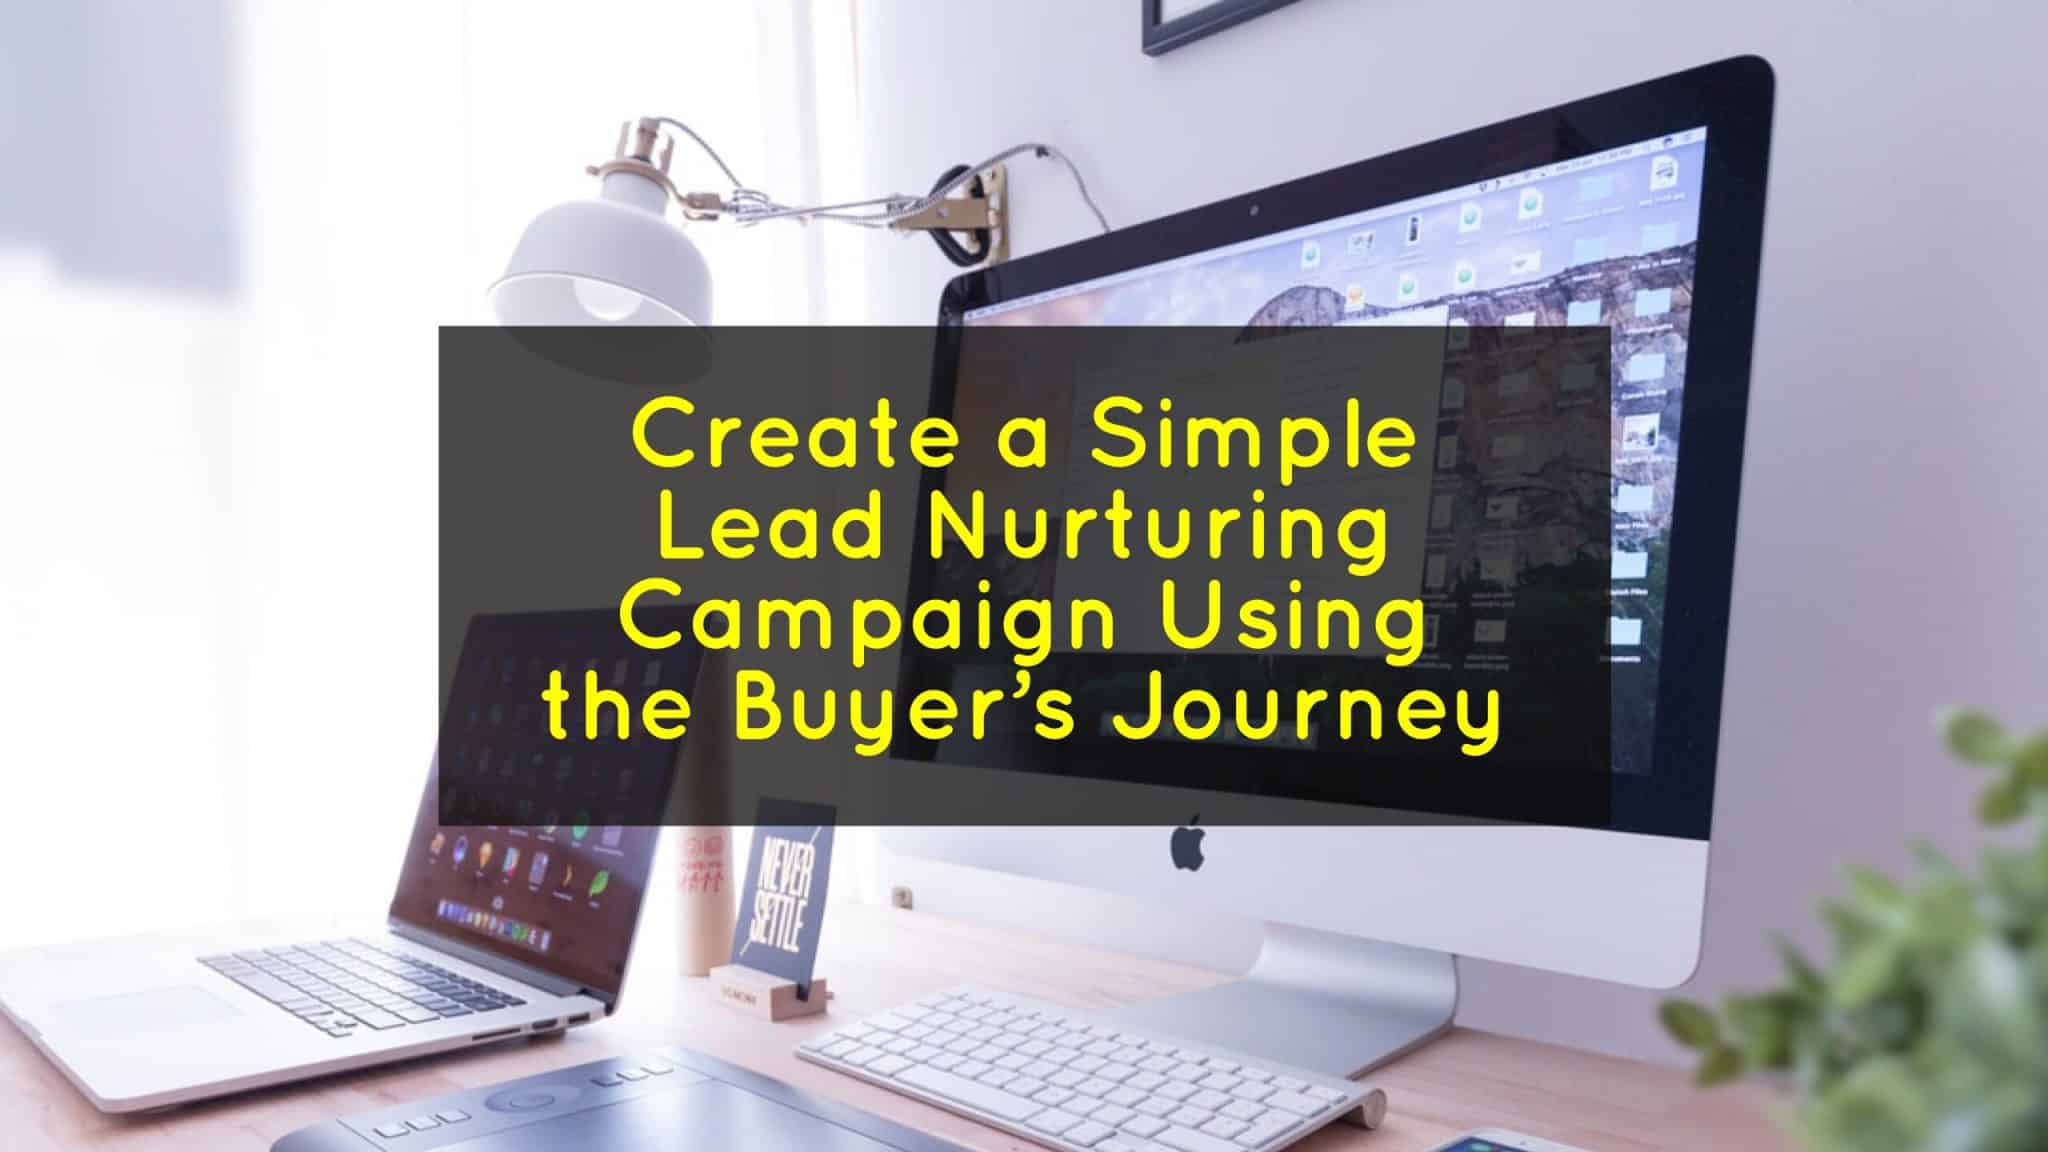 Create a Simple Lead Nurturing Campaign Using the Buyer's Journey